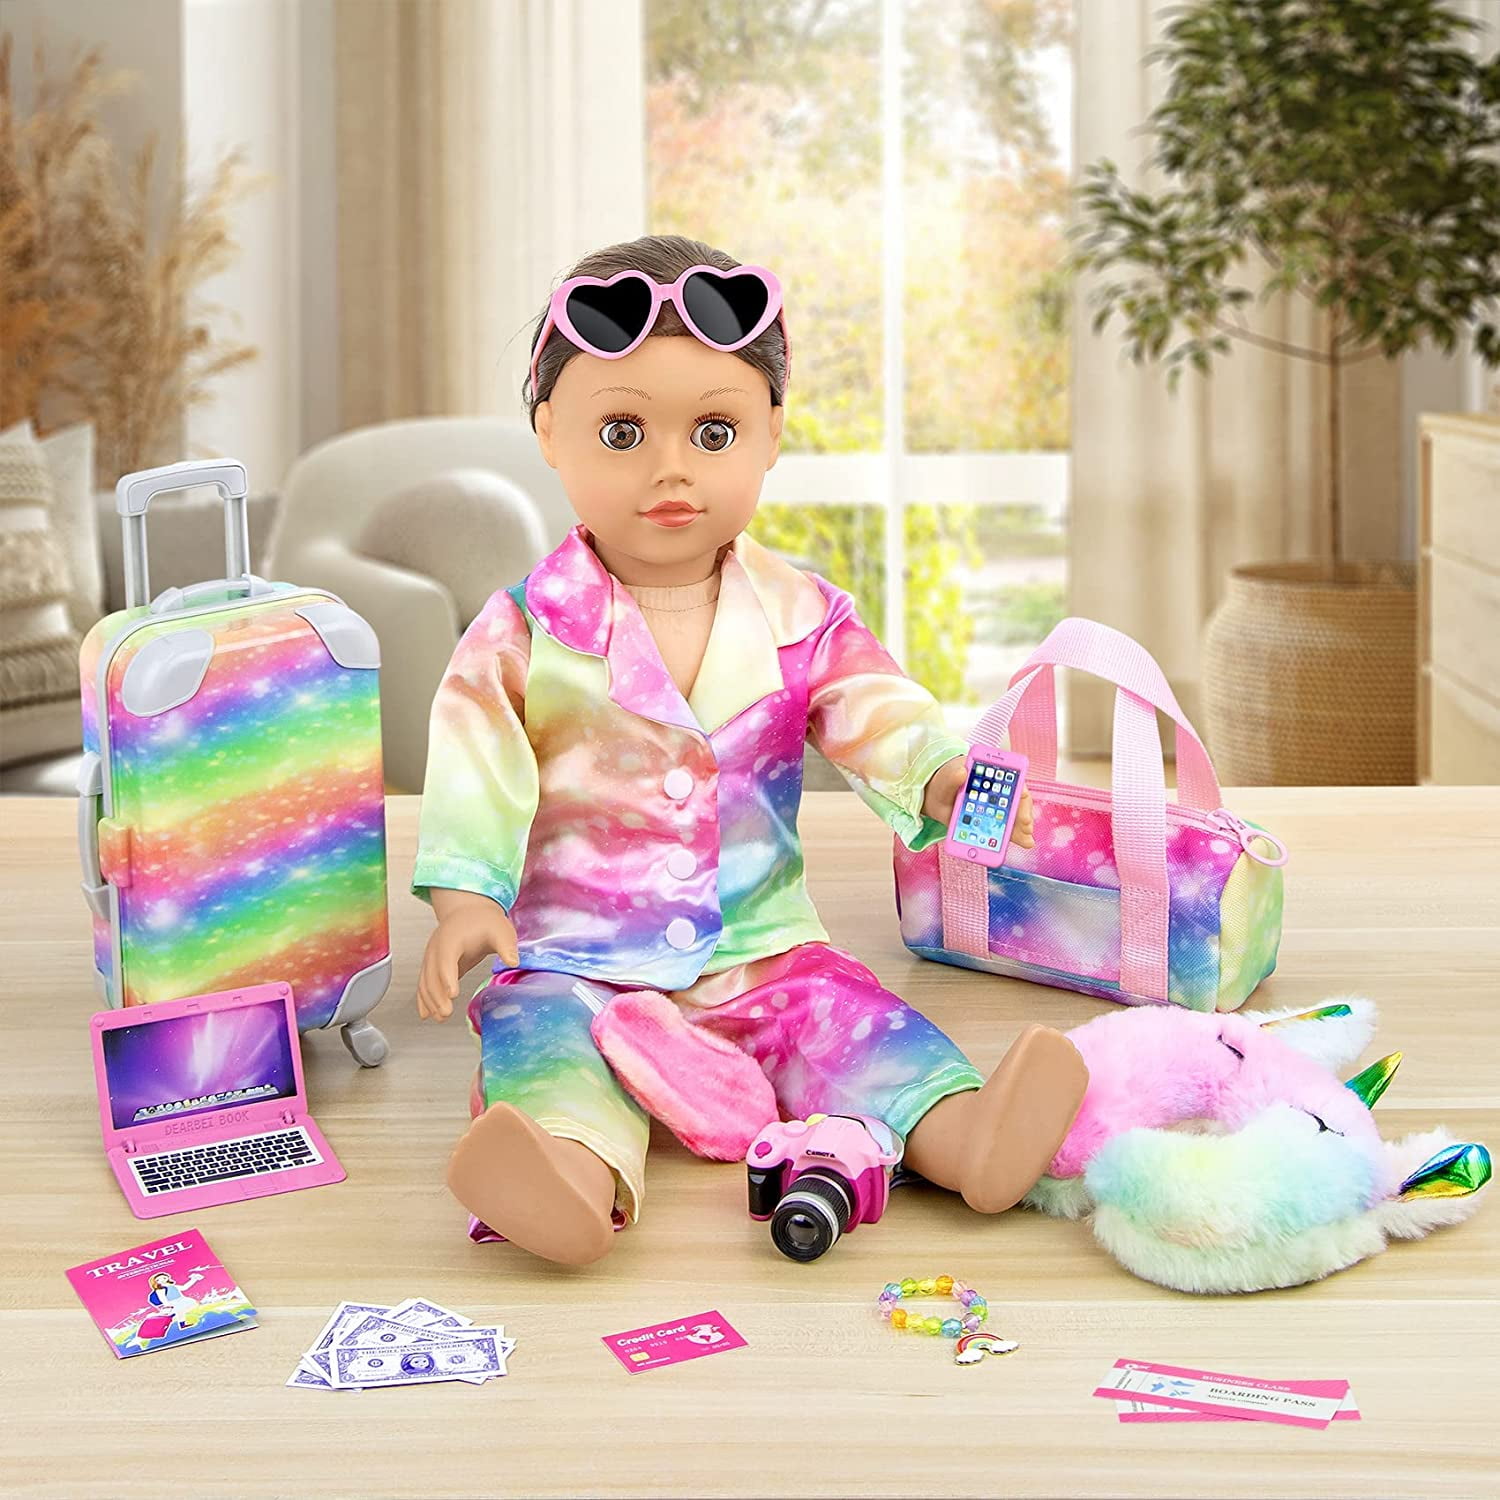 18 Inch Doll Accessories Play Travel Set - 16 Pcs Suitcase Luggage Carrier  with Sunglasses, Passport, Tickets, Camera, and More, Beverly Hills Doll